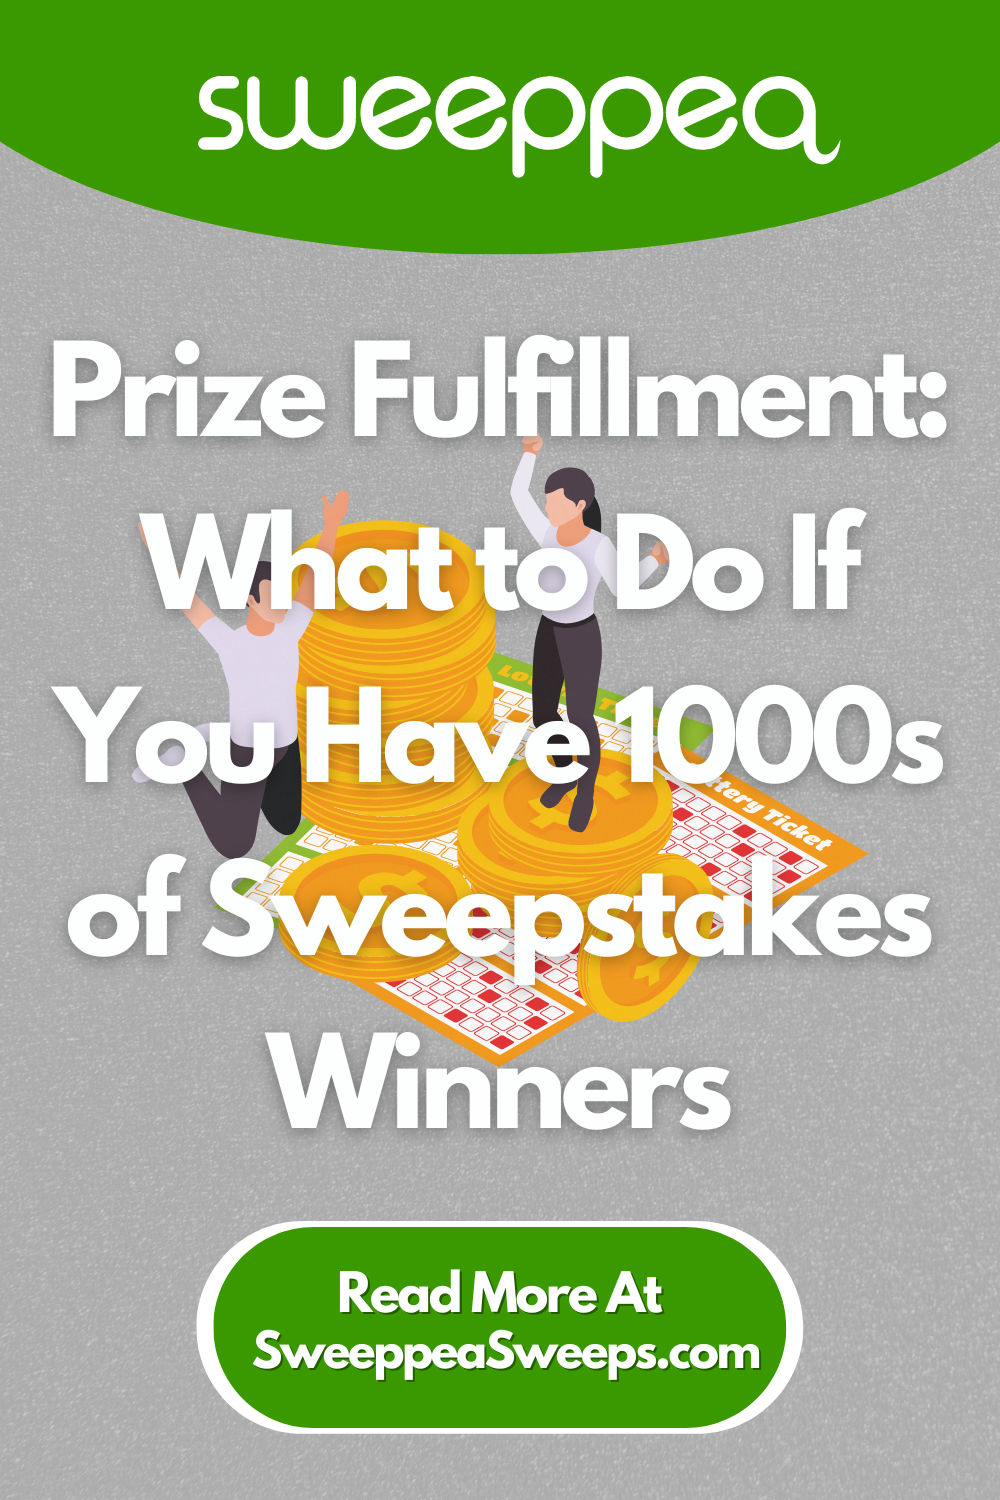 Prize Fulfillment What to Do If You Have 1000s of Sweepstakes Winners